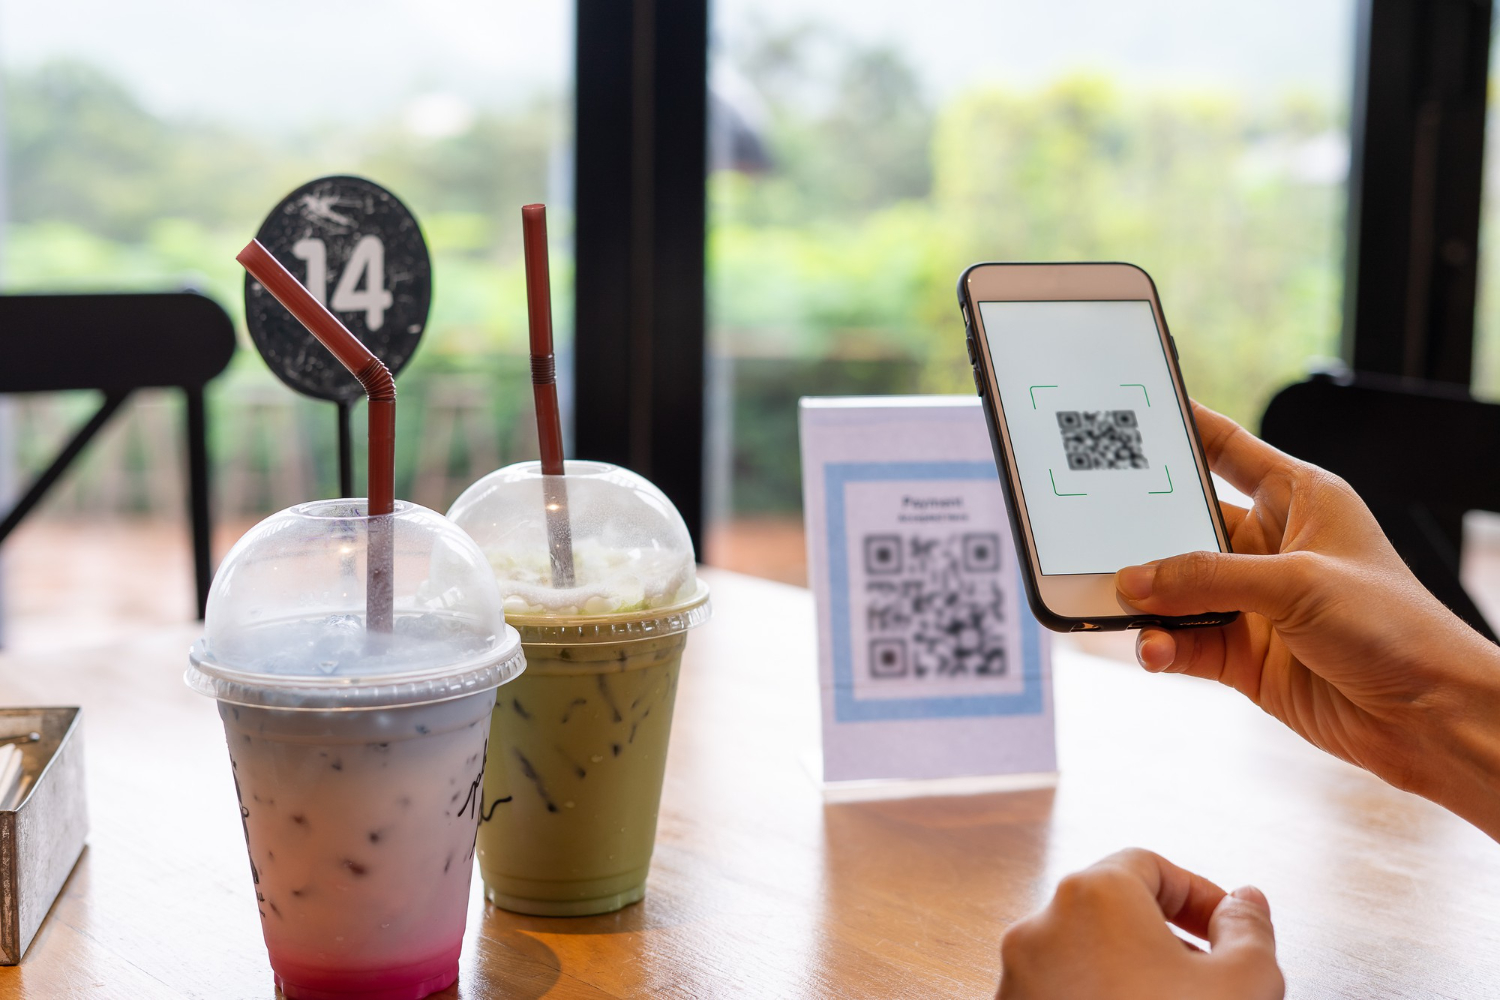 womens hands are using phone scan qr code select food menu in china